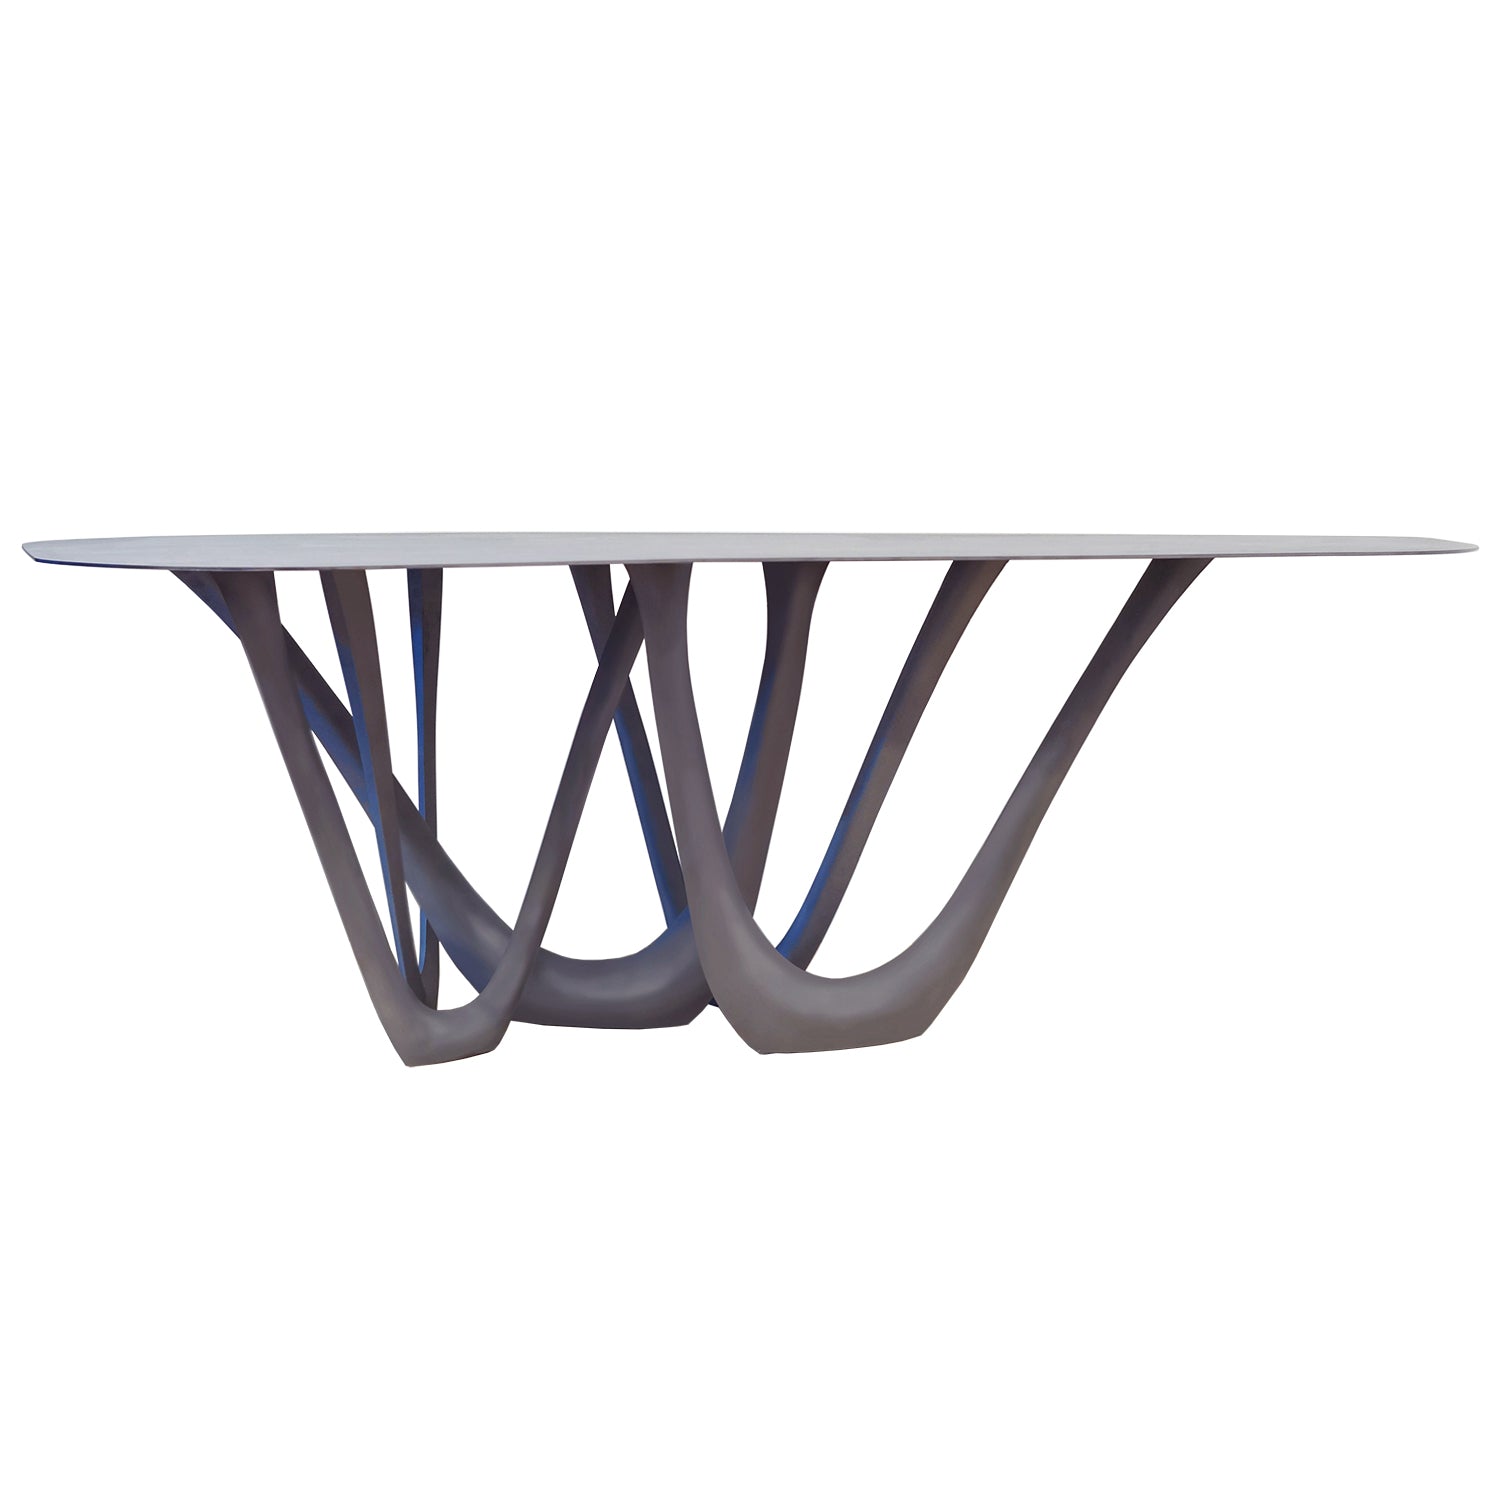 G Table: Table Base + Top + Carbon Steel + Carbon Steel + Powder Coated